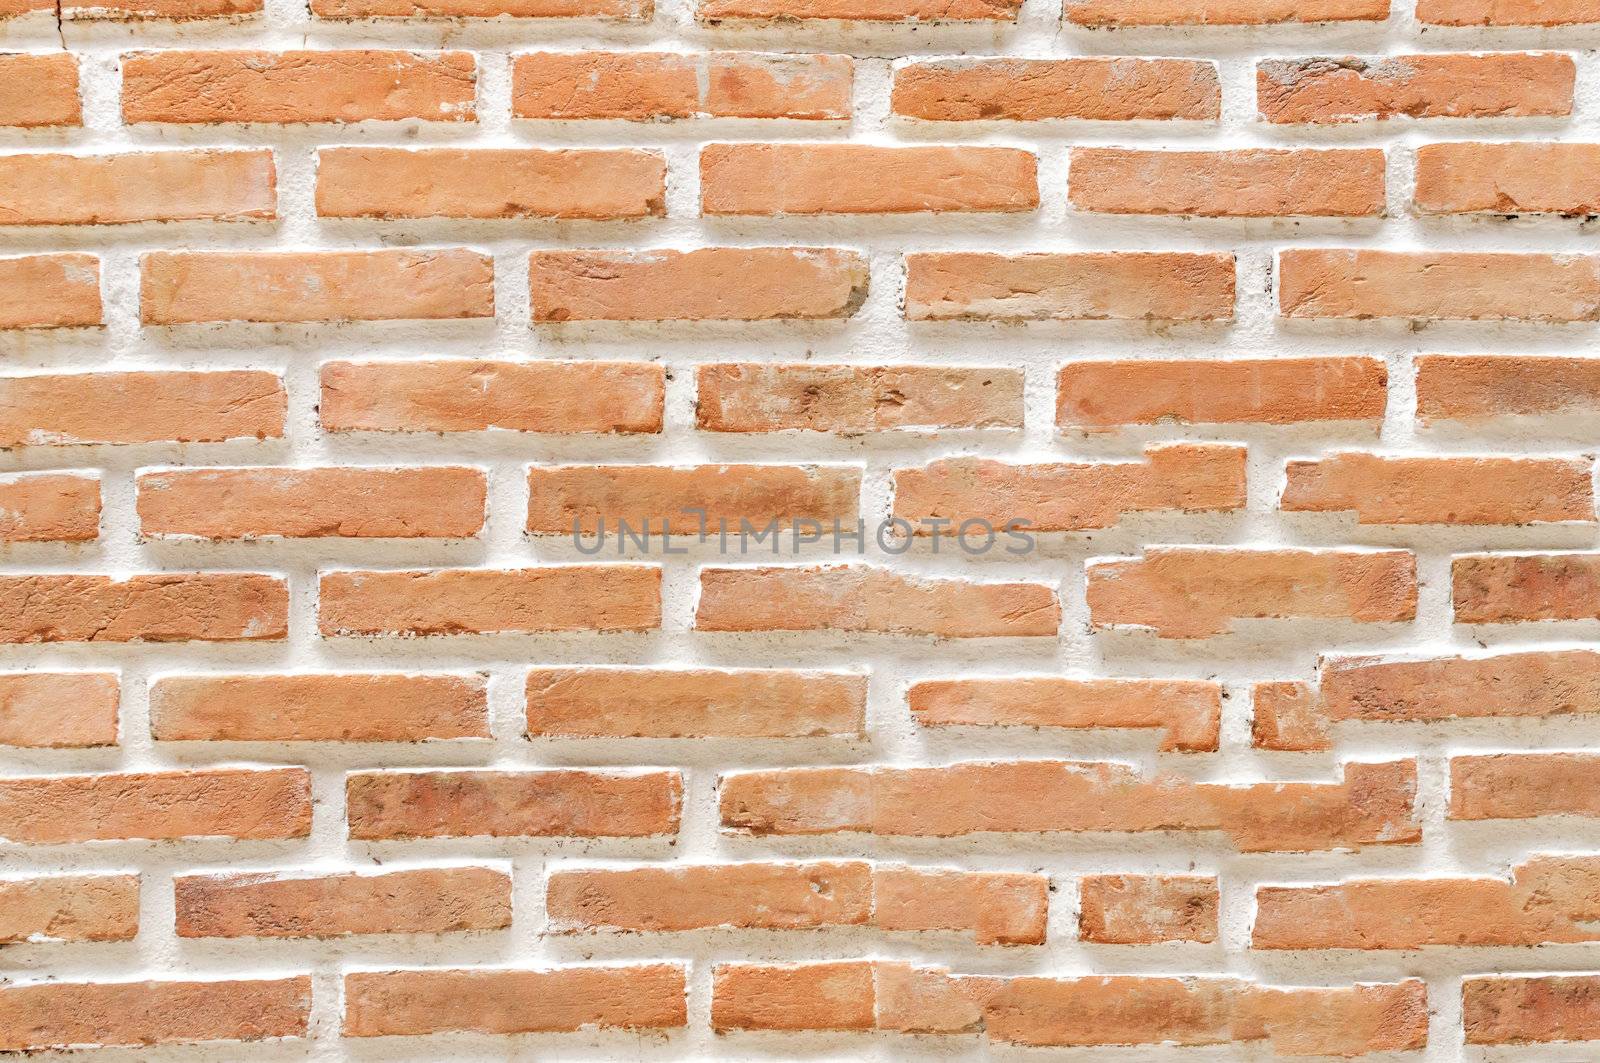 A brick wall background and texture.